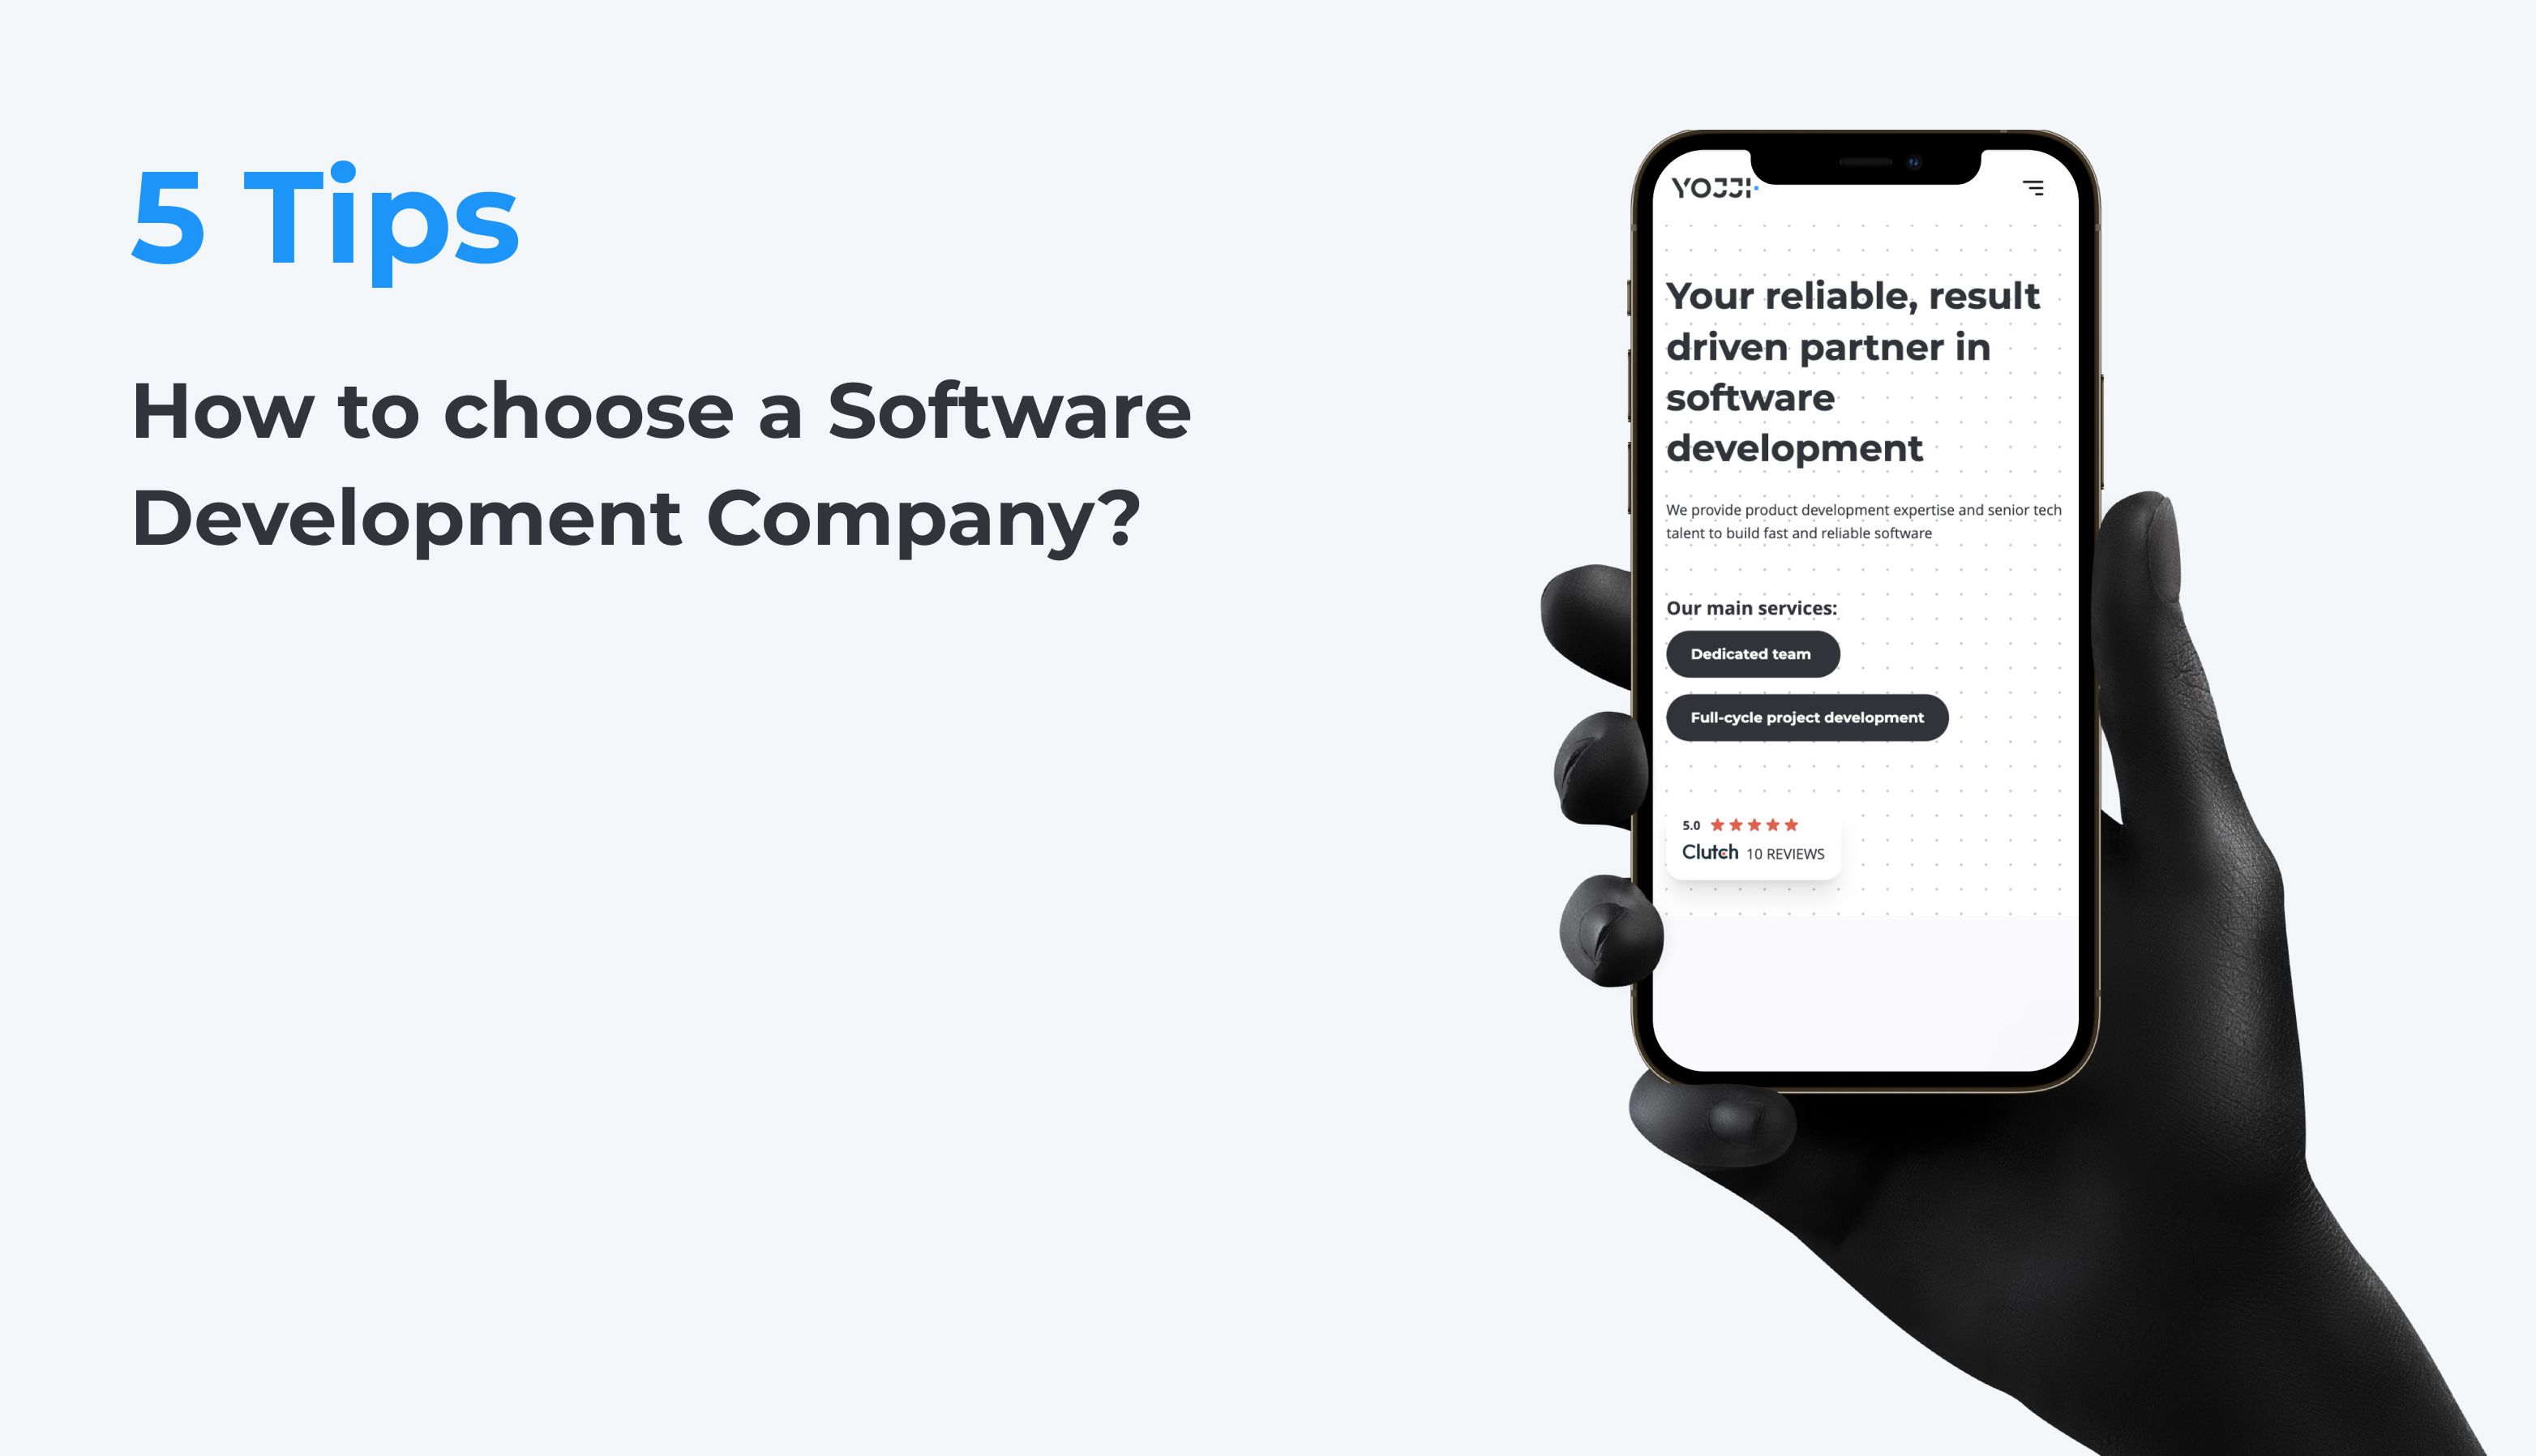 How to choose software development company